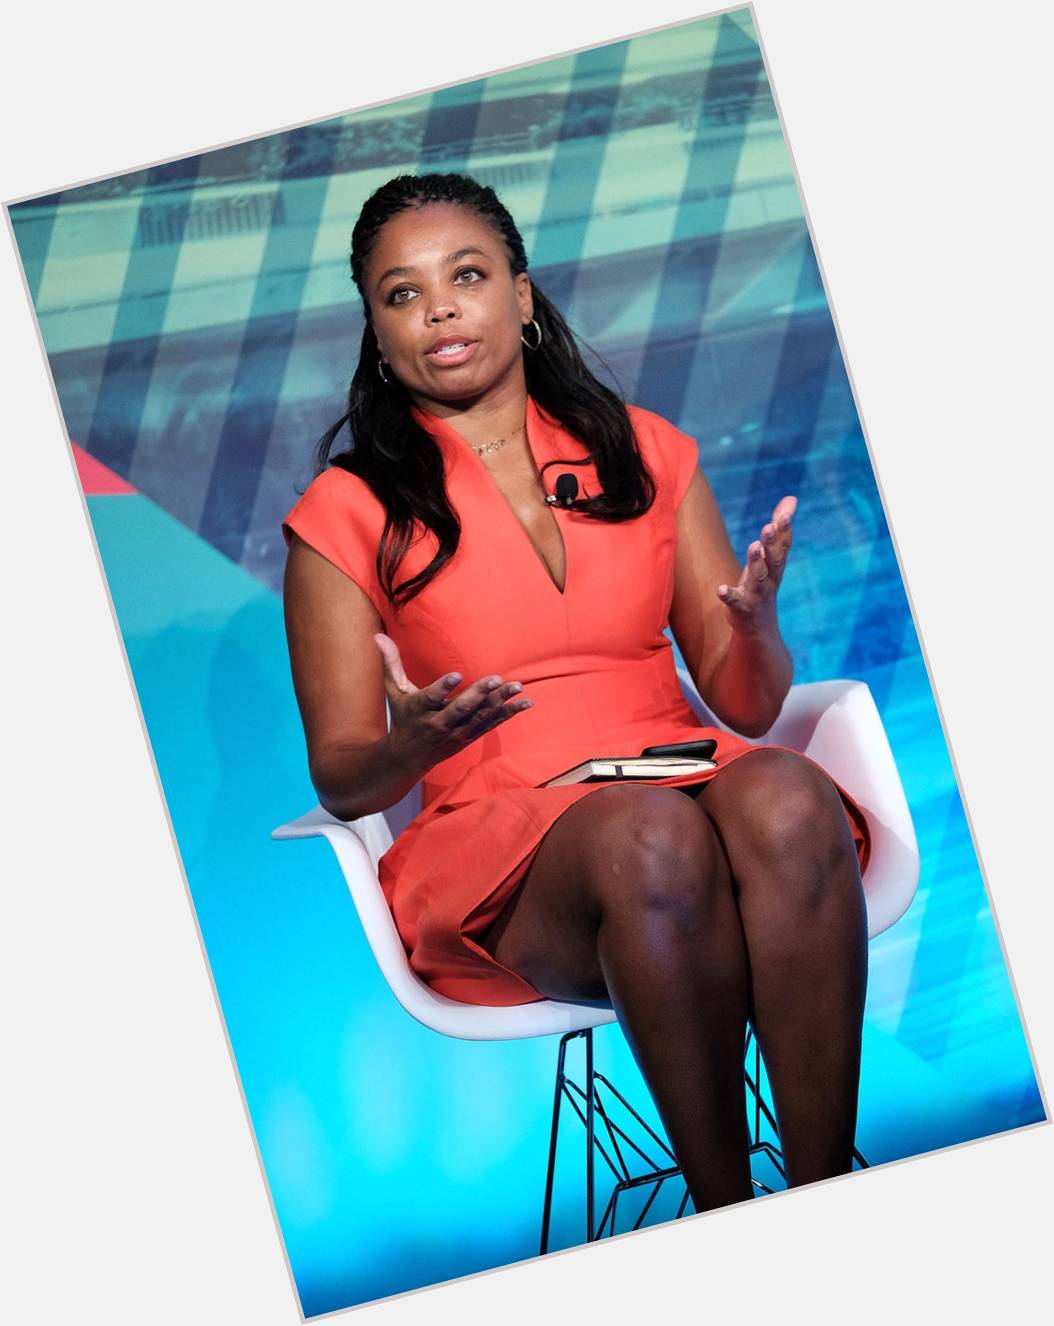 Jemele Hill exclusive hot pic 3